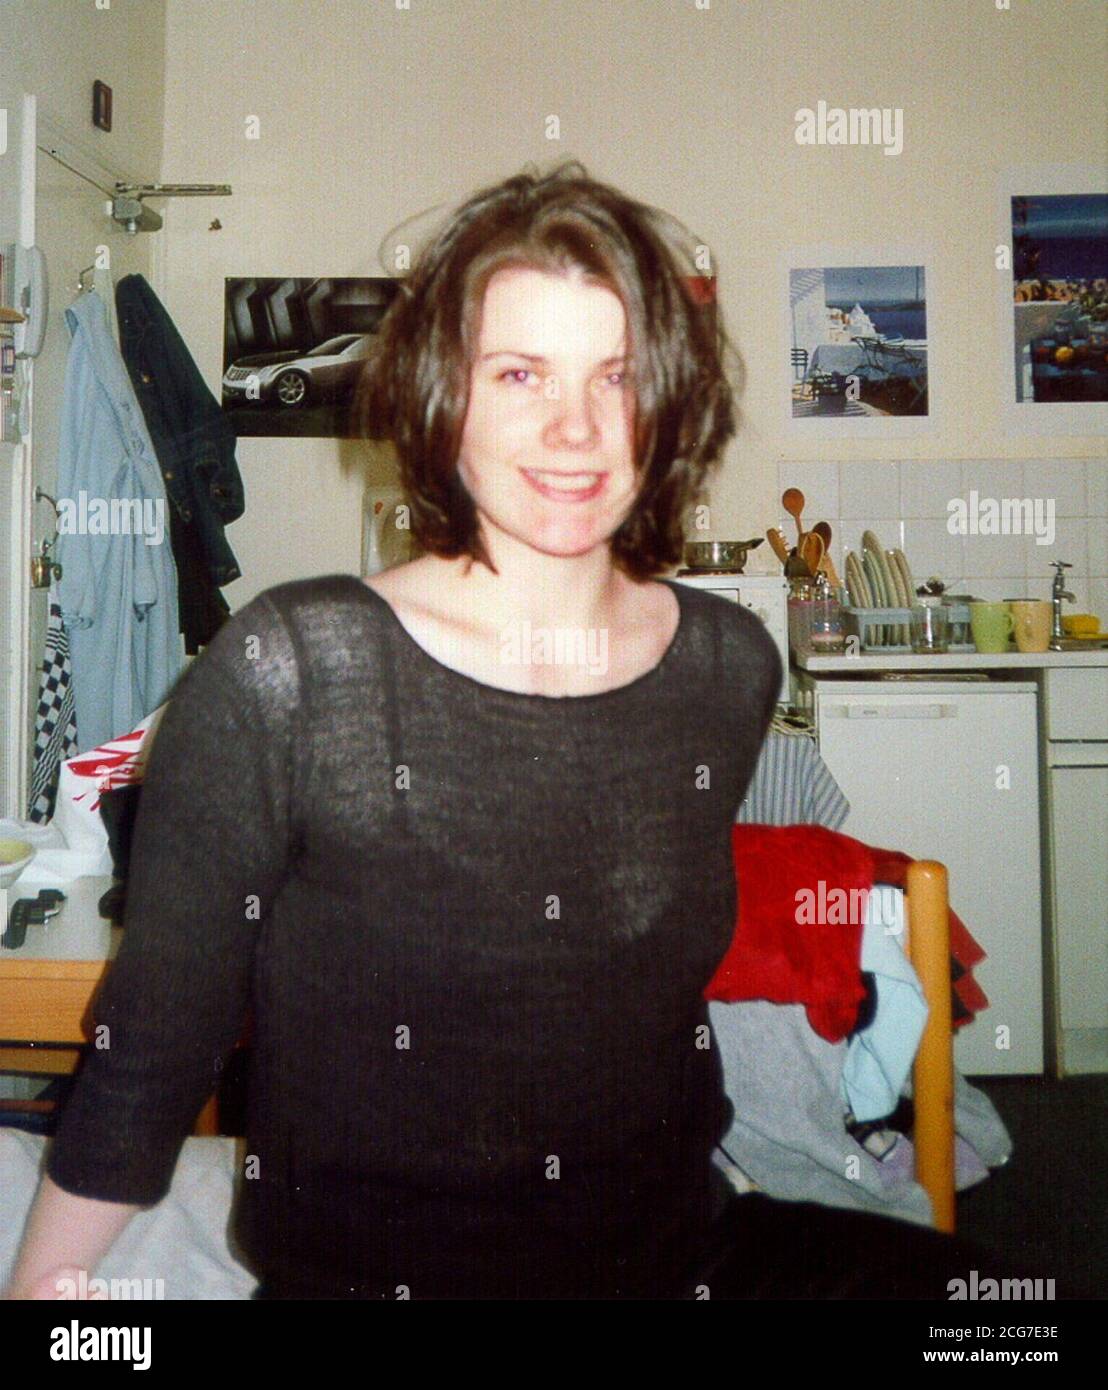 Margarite Van Campenhout, a 24-year-old Dutch national who died from a single wound to the heart after being attacked on 11/1/02 at Euston station, London. She was allegedly attacked by her ex-partner after which he tried to cut his own throat and stab himself. * in the chest, police said. He is in a serious but stable condition in an unnamed London hospital. 27/8/02: An Old Bailey court heard how Scaffolder Vaso Aliu, 29, allegedly confronted his ex-girlfriend, Van Campenhout, on the platform of a London-Euston Underground platform and tried to persuade her to see him again.'When she yet ag Stock Photo